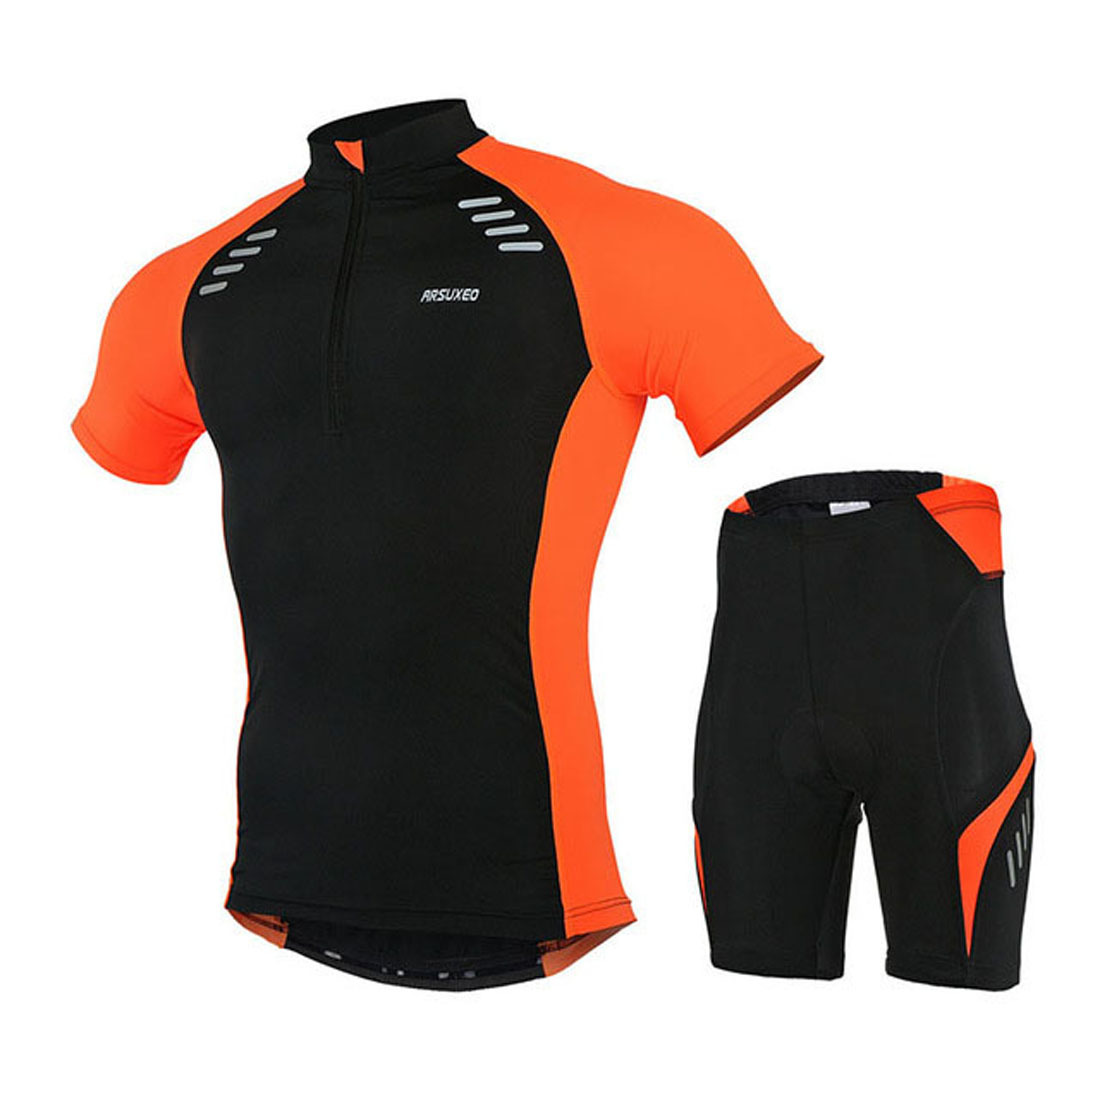 Mens Cycling Jersey Set Short Sleeve Bicycle Biking Suits T Shirts intended for Cycling Jersey Set